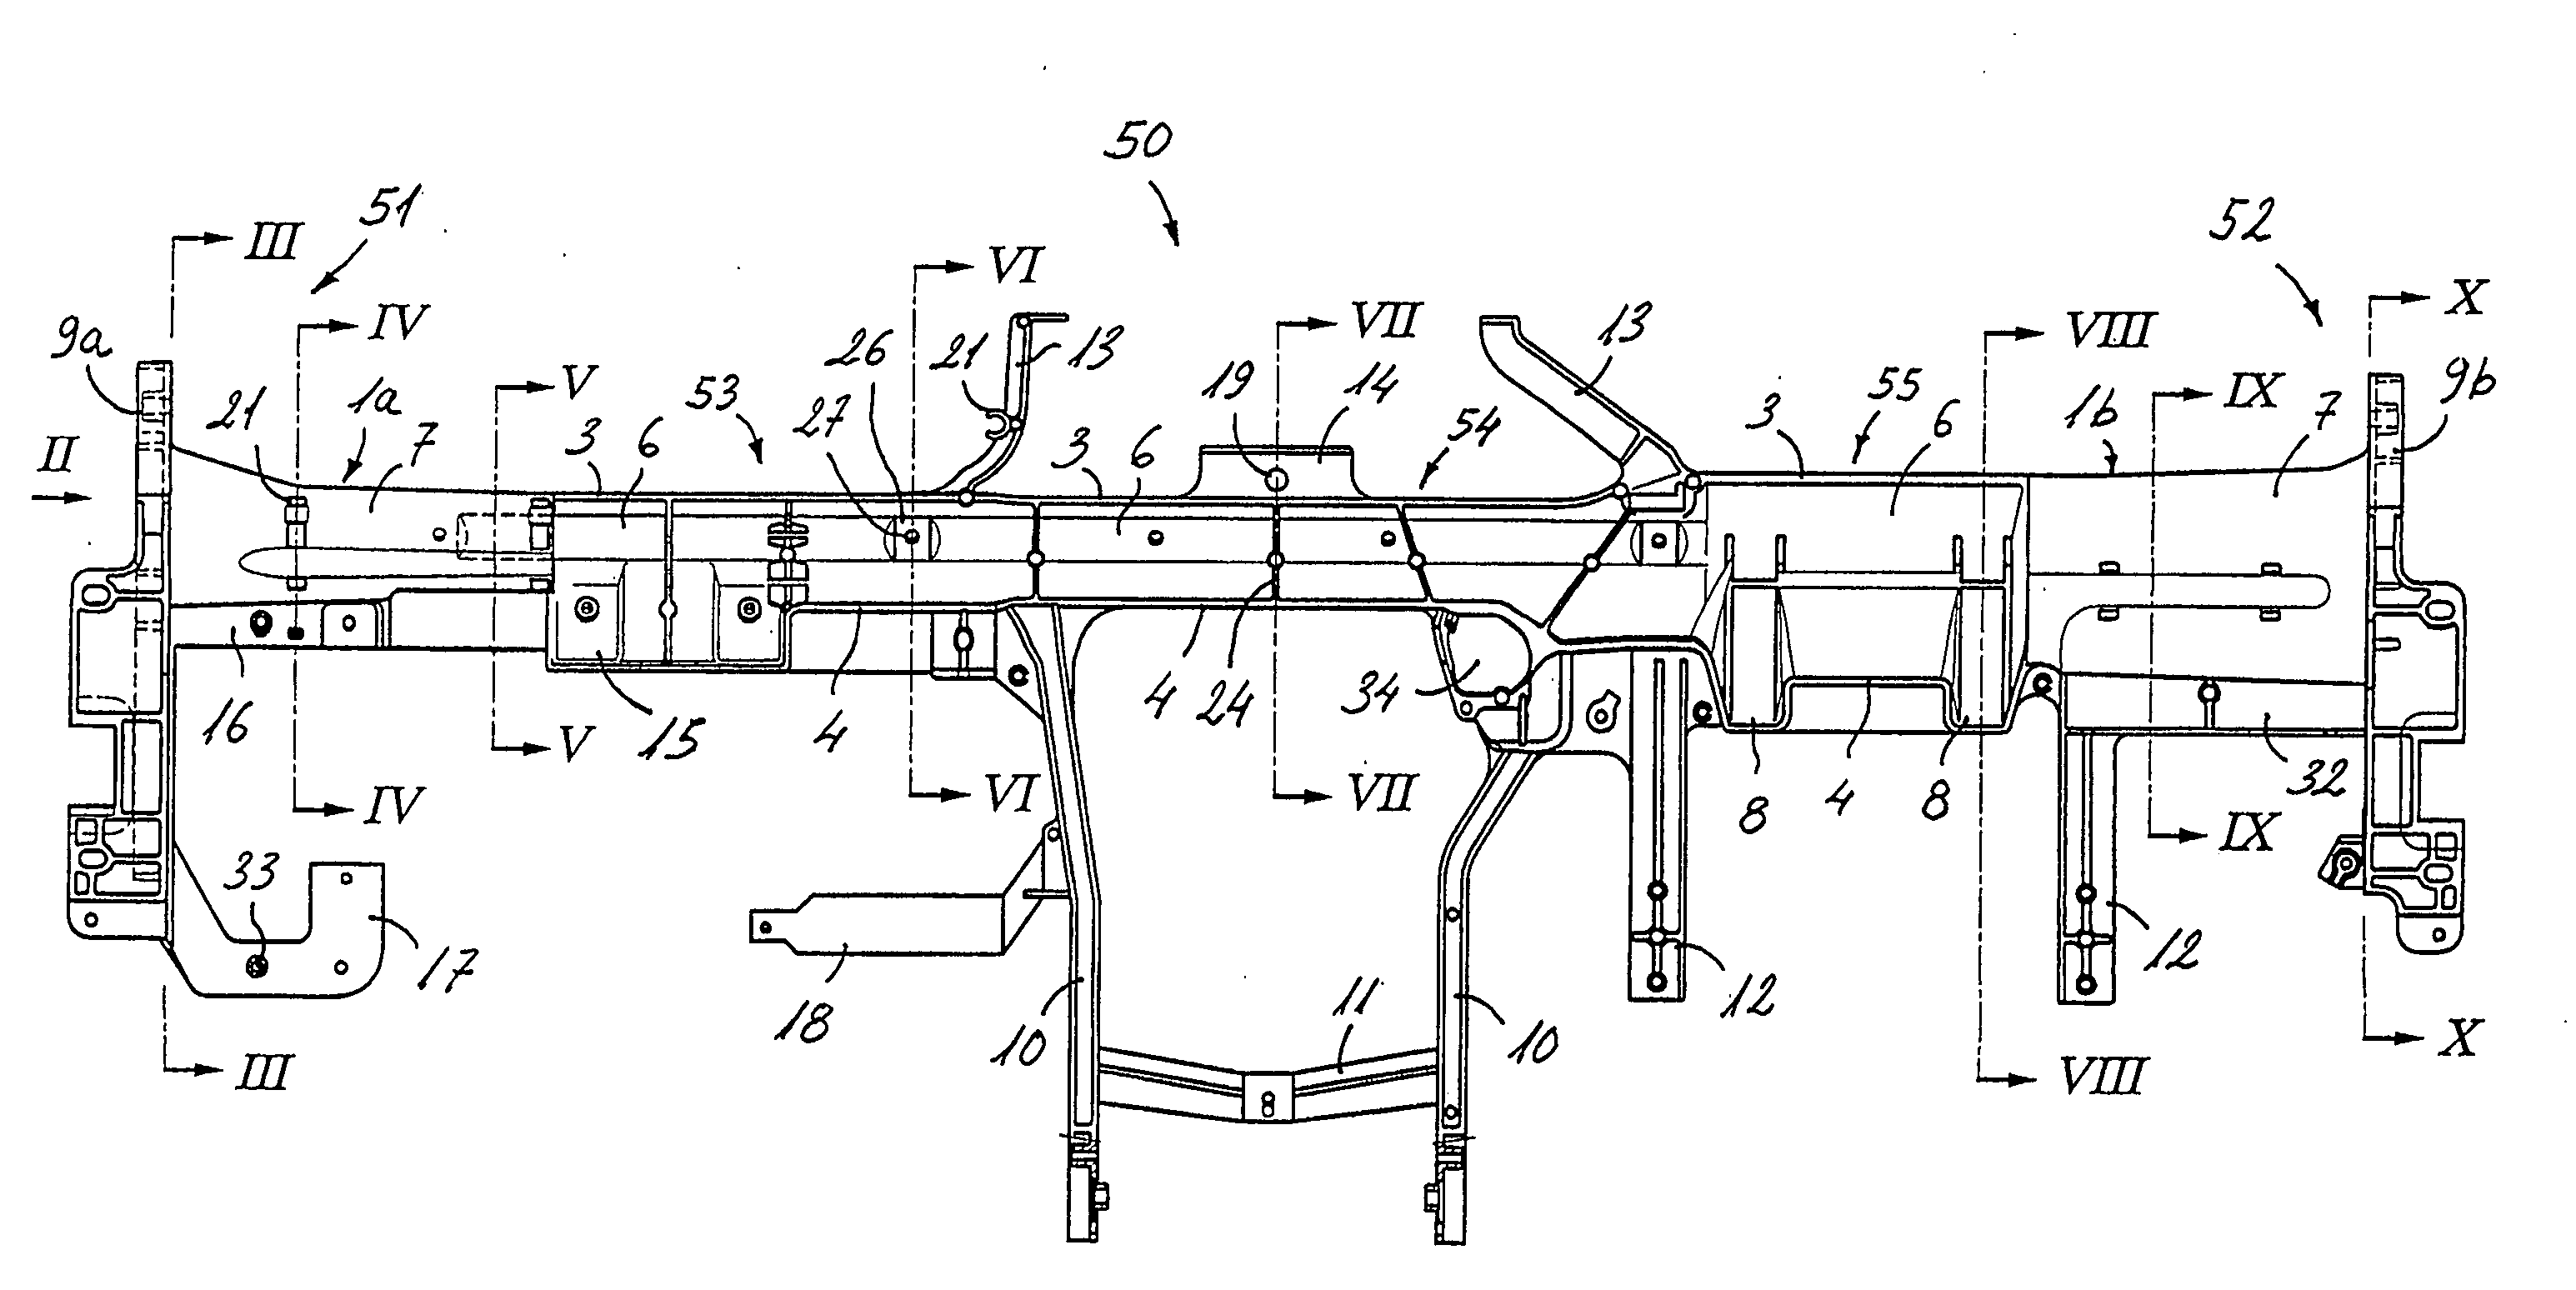 Support Crossbeam For An Instrument Panel